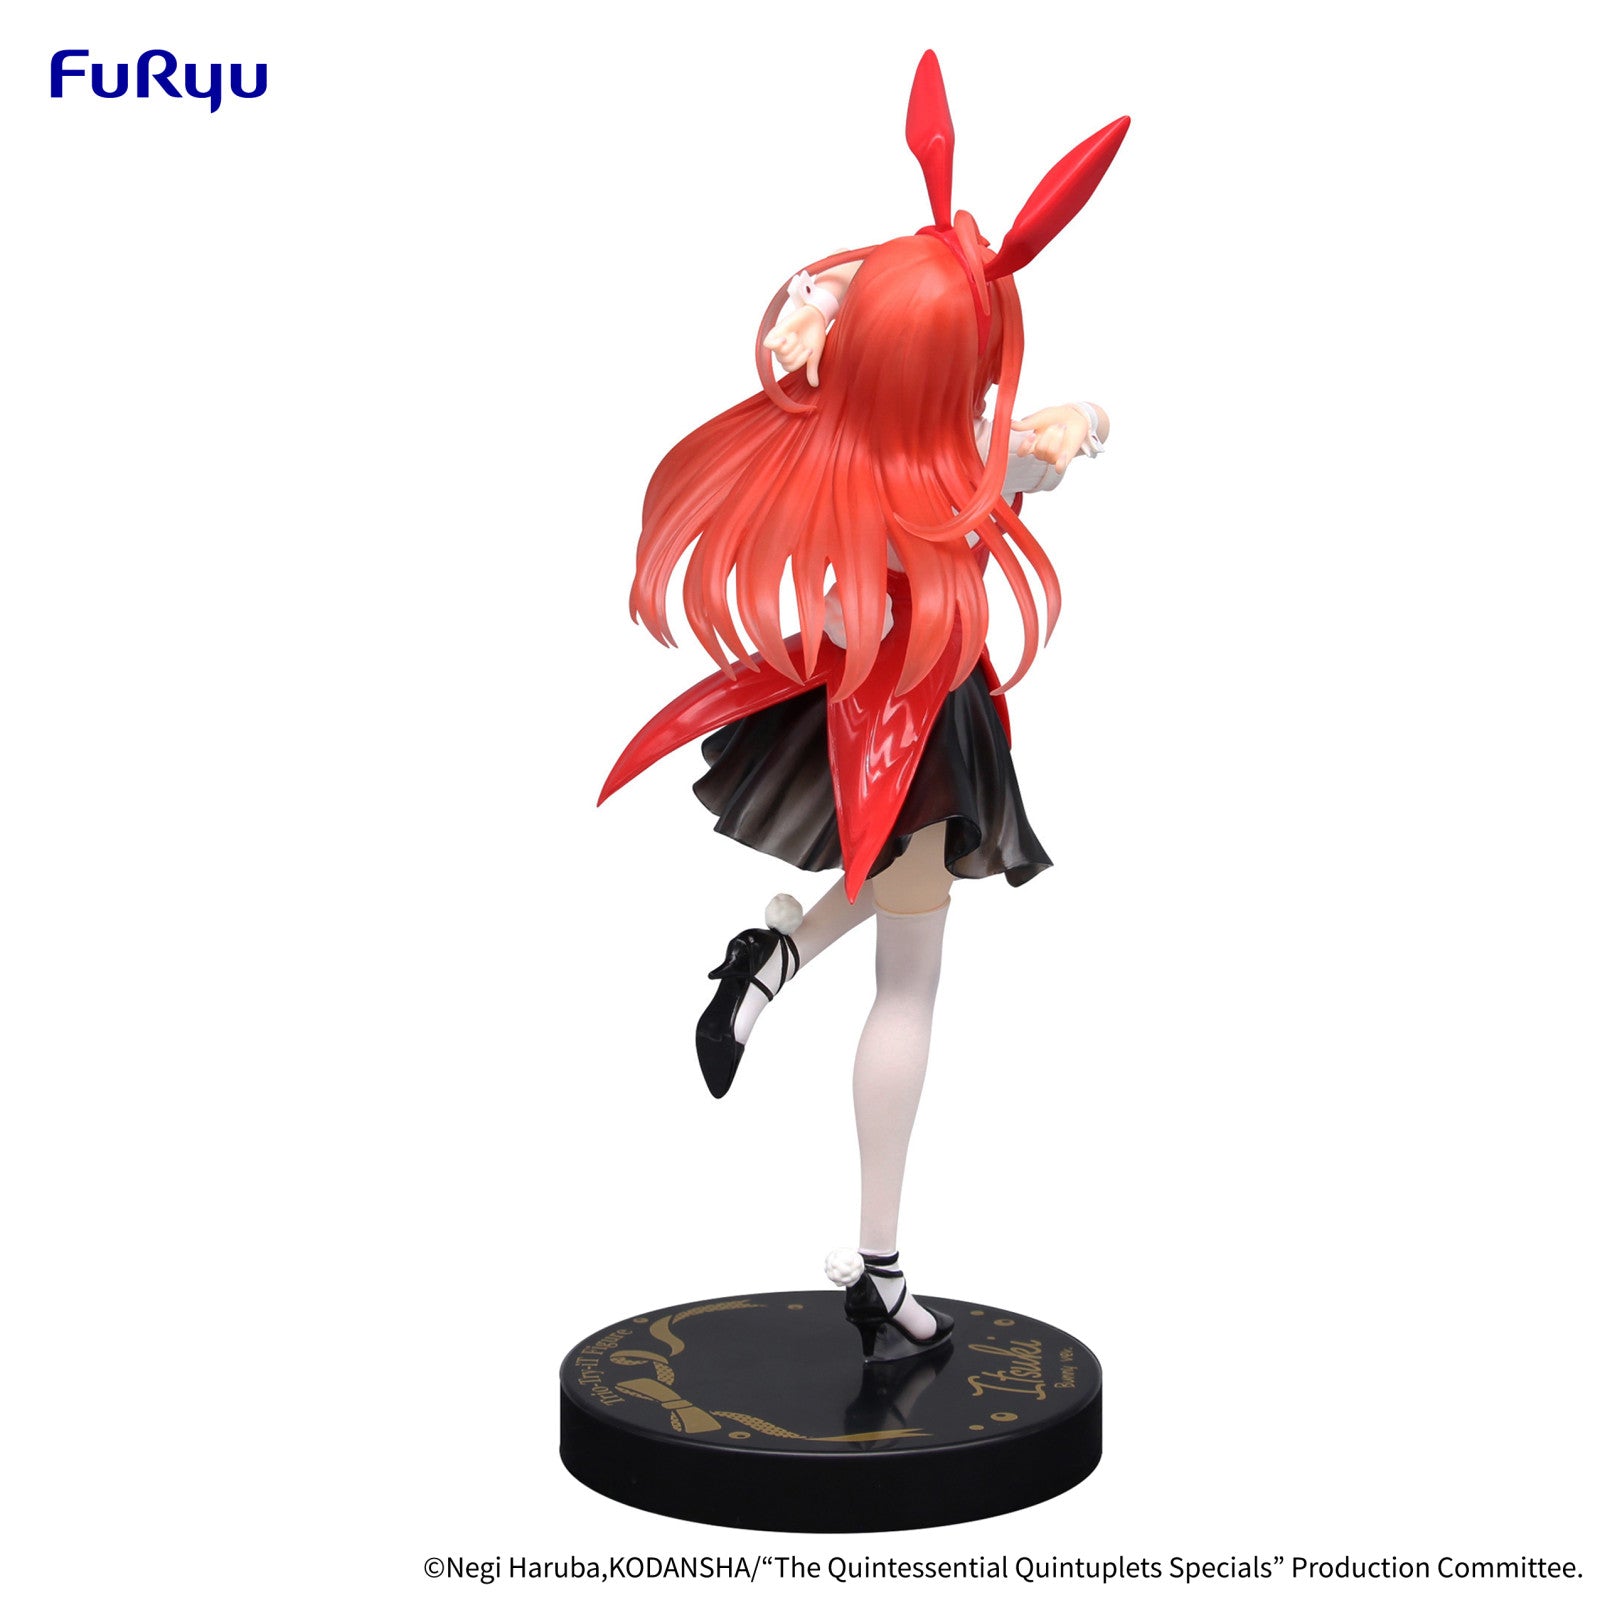 PRE ORDER The Quintessential Quintuplets Specials: TRIO TRY IT FIGURE - Nakano Itsuki Bunnies Version (Another Color)